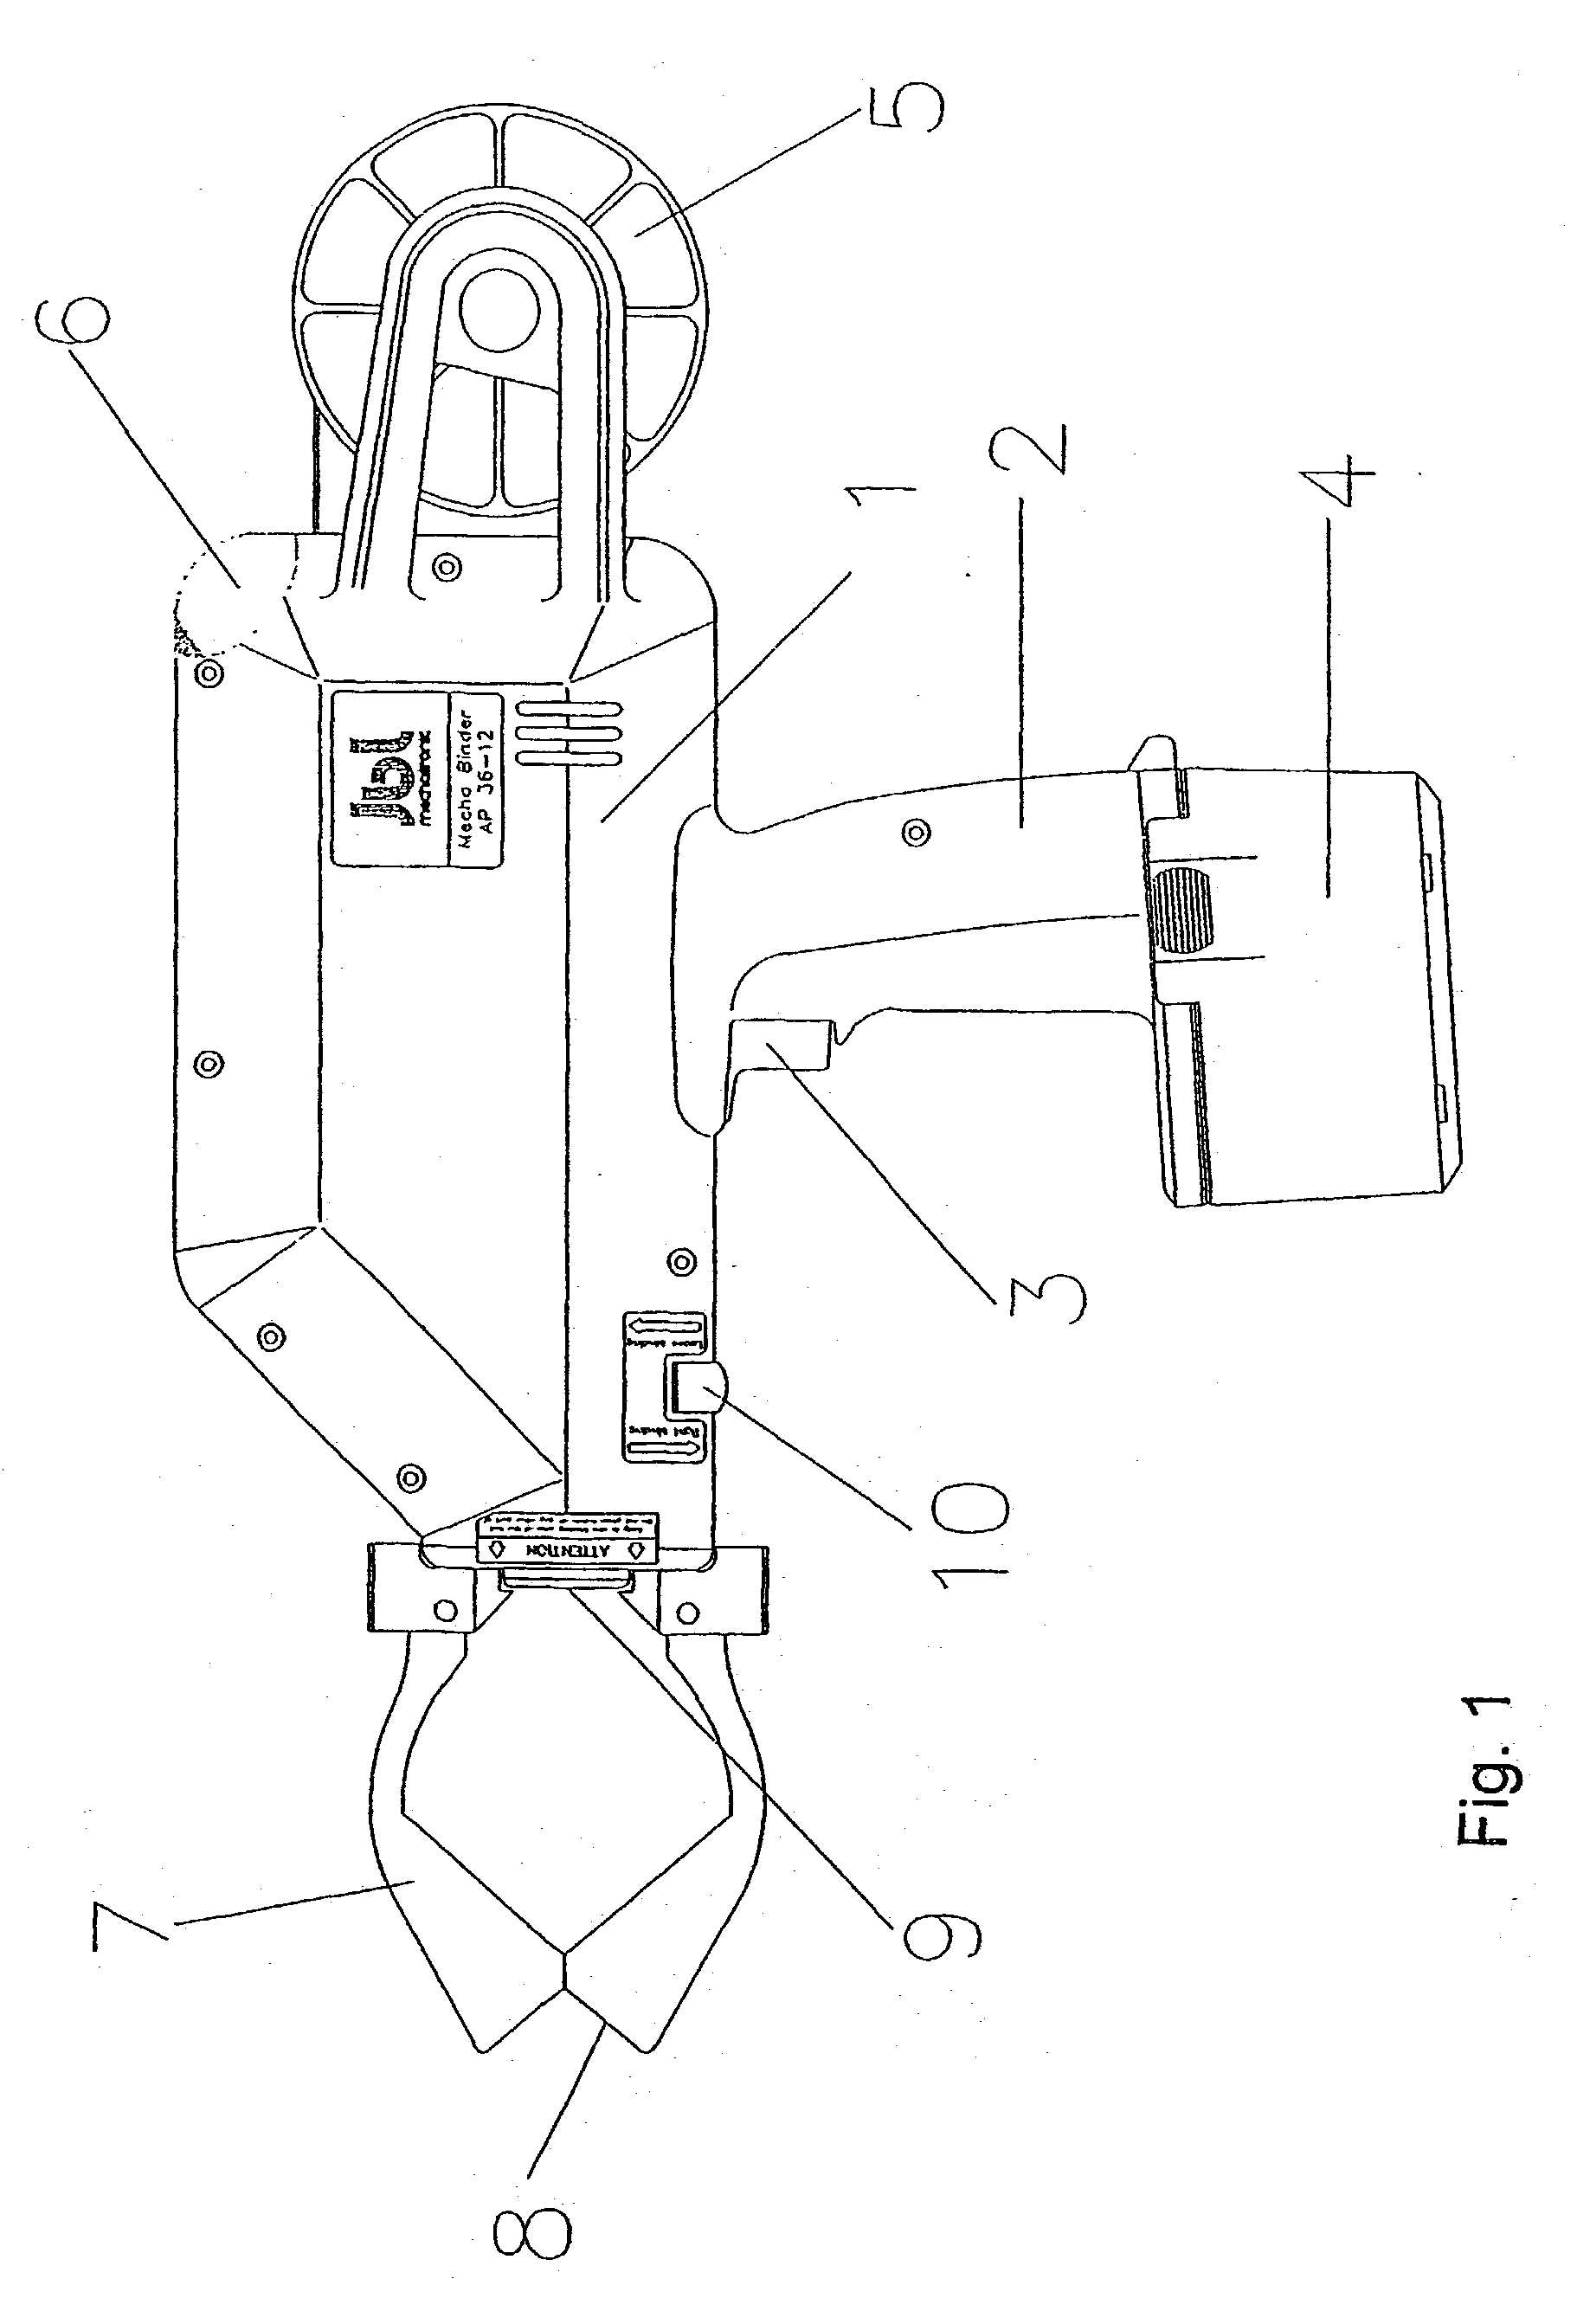 Method and an apparatus for twisting and tightening a wire